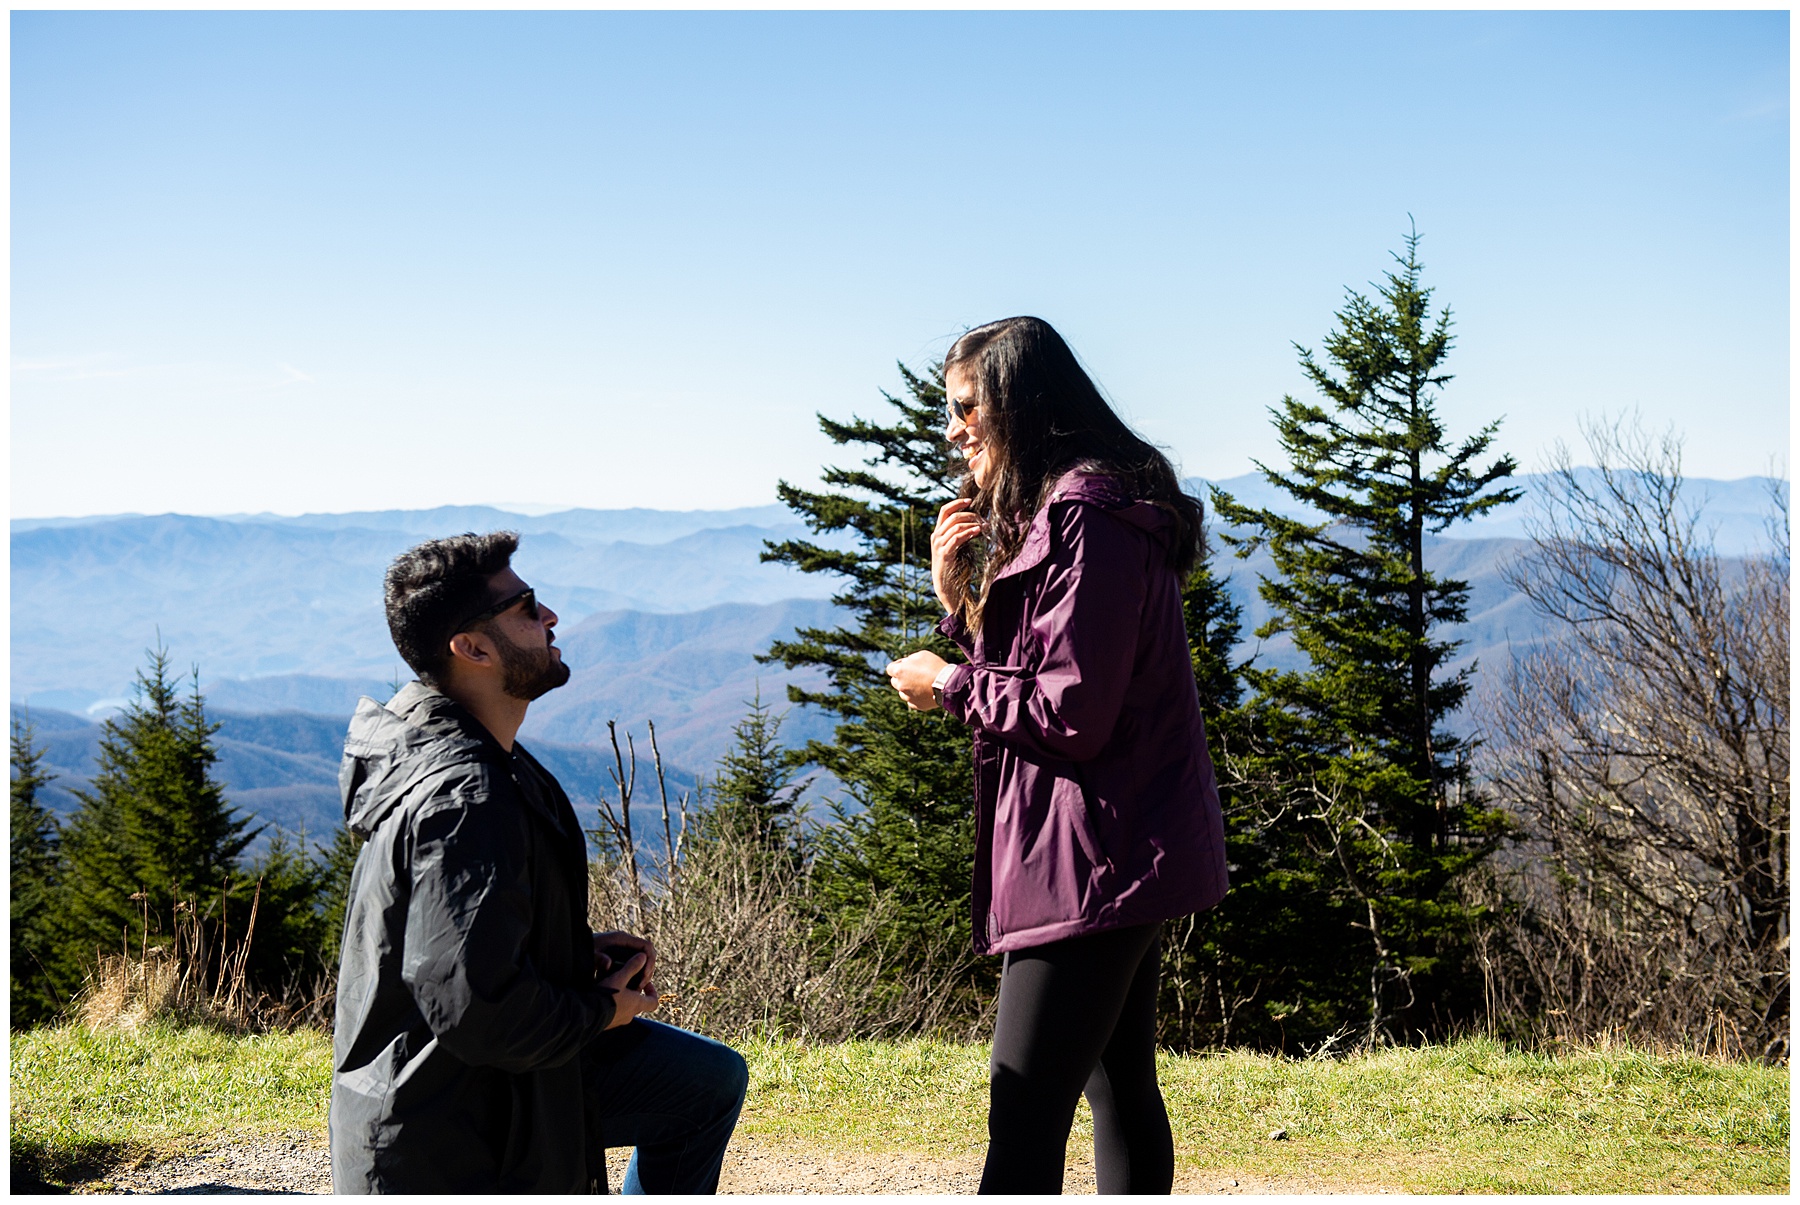 Man proposing to woman during surprise proposal in Great Smoky Mountain National Park